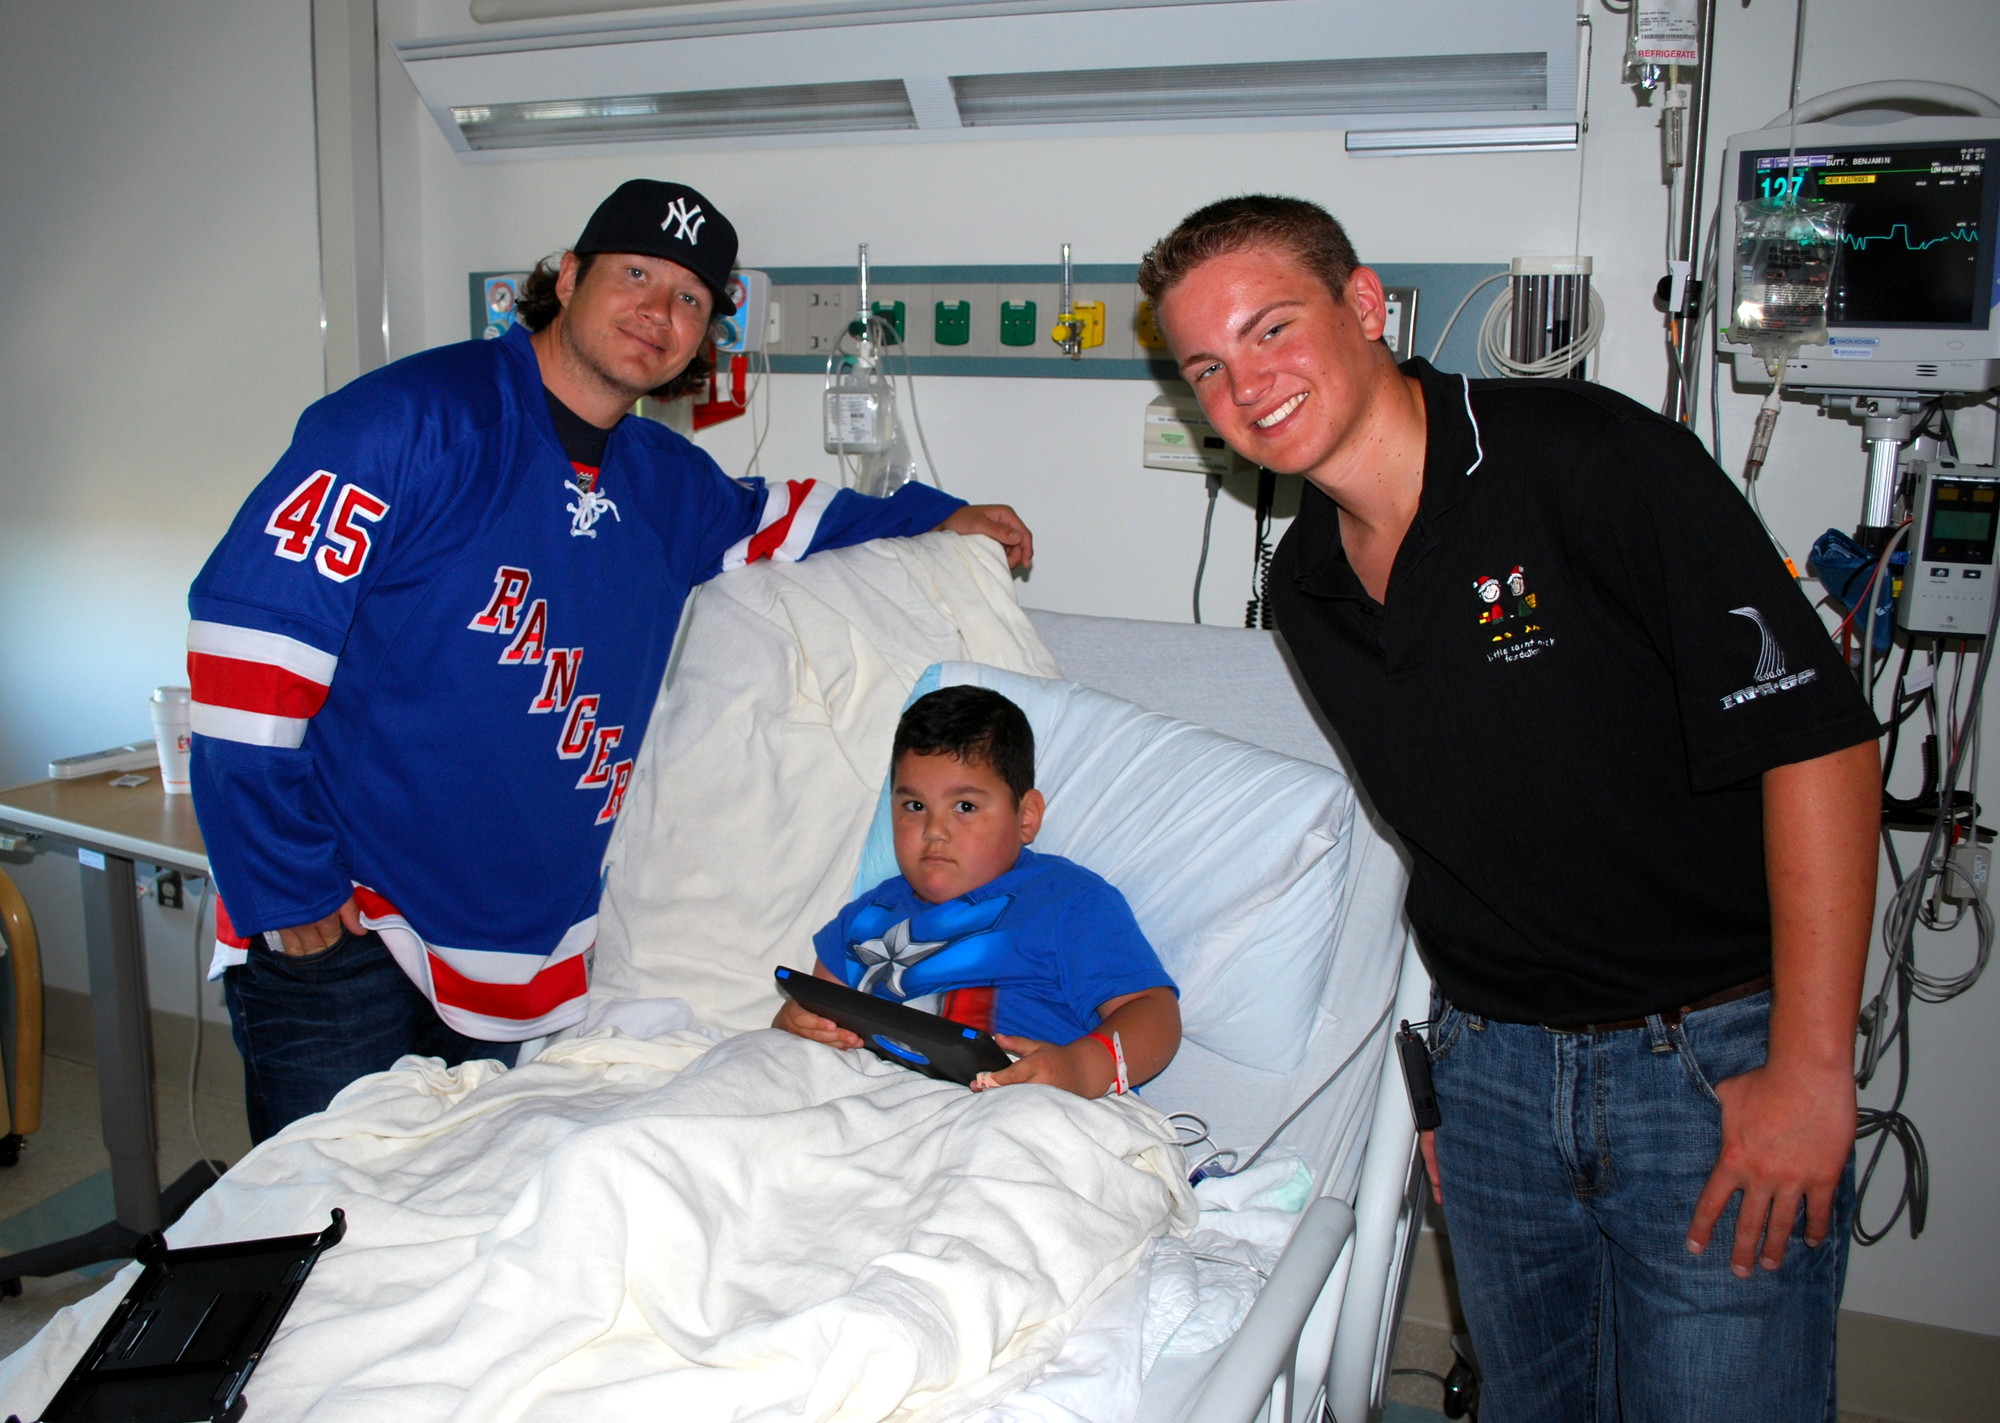 Ray Mohler Jr., right, and Rangers star Arron Asham delivered smiles and autographed pucks to young patients at Winthrop University Hospital’s Child Life Program ward in 2013.